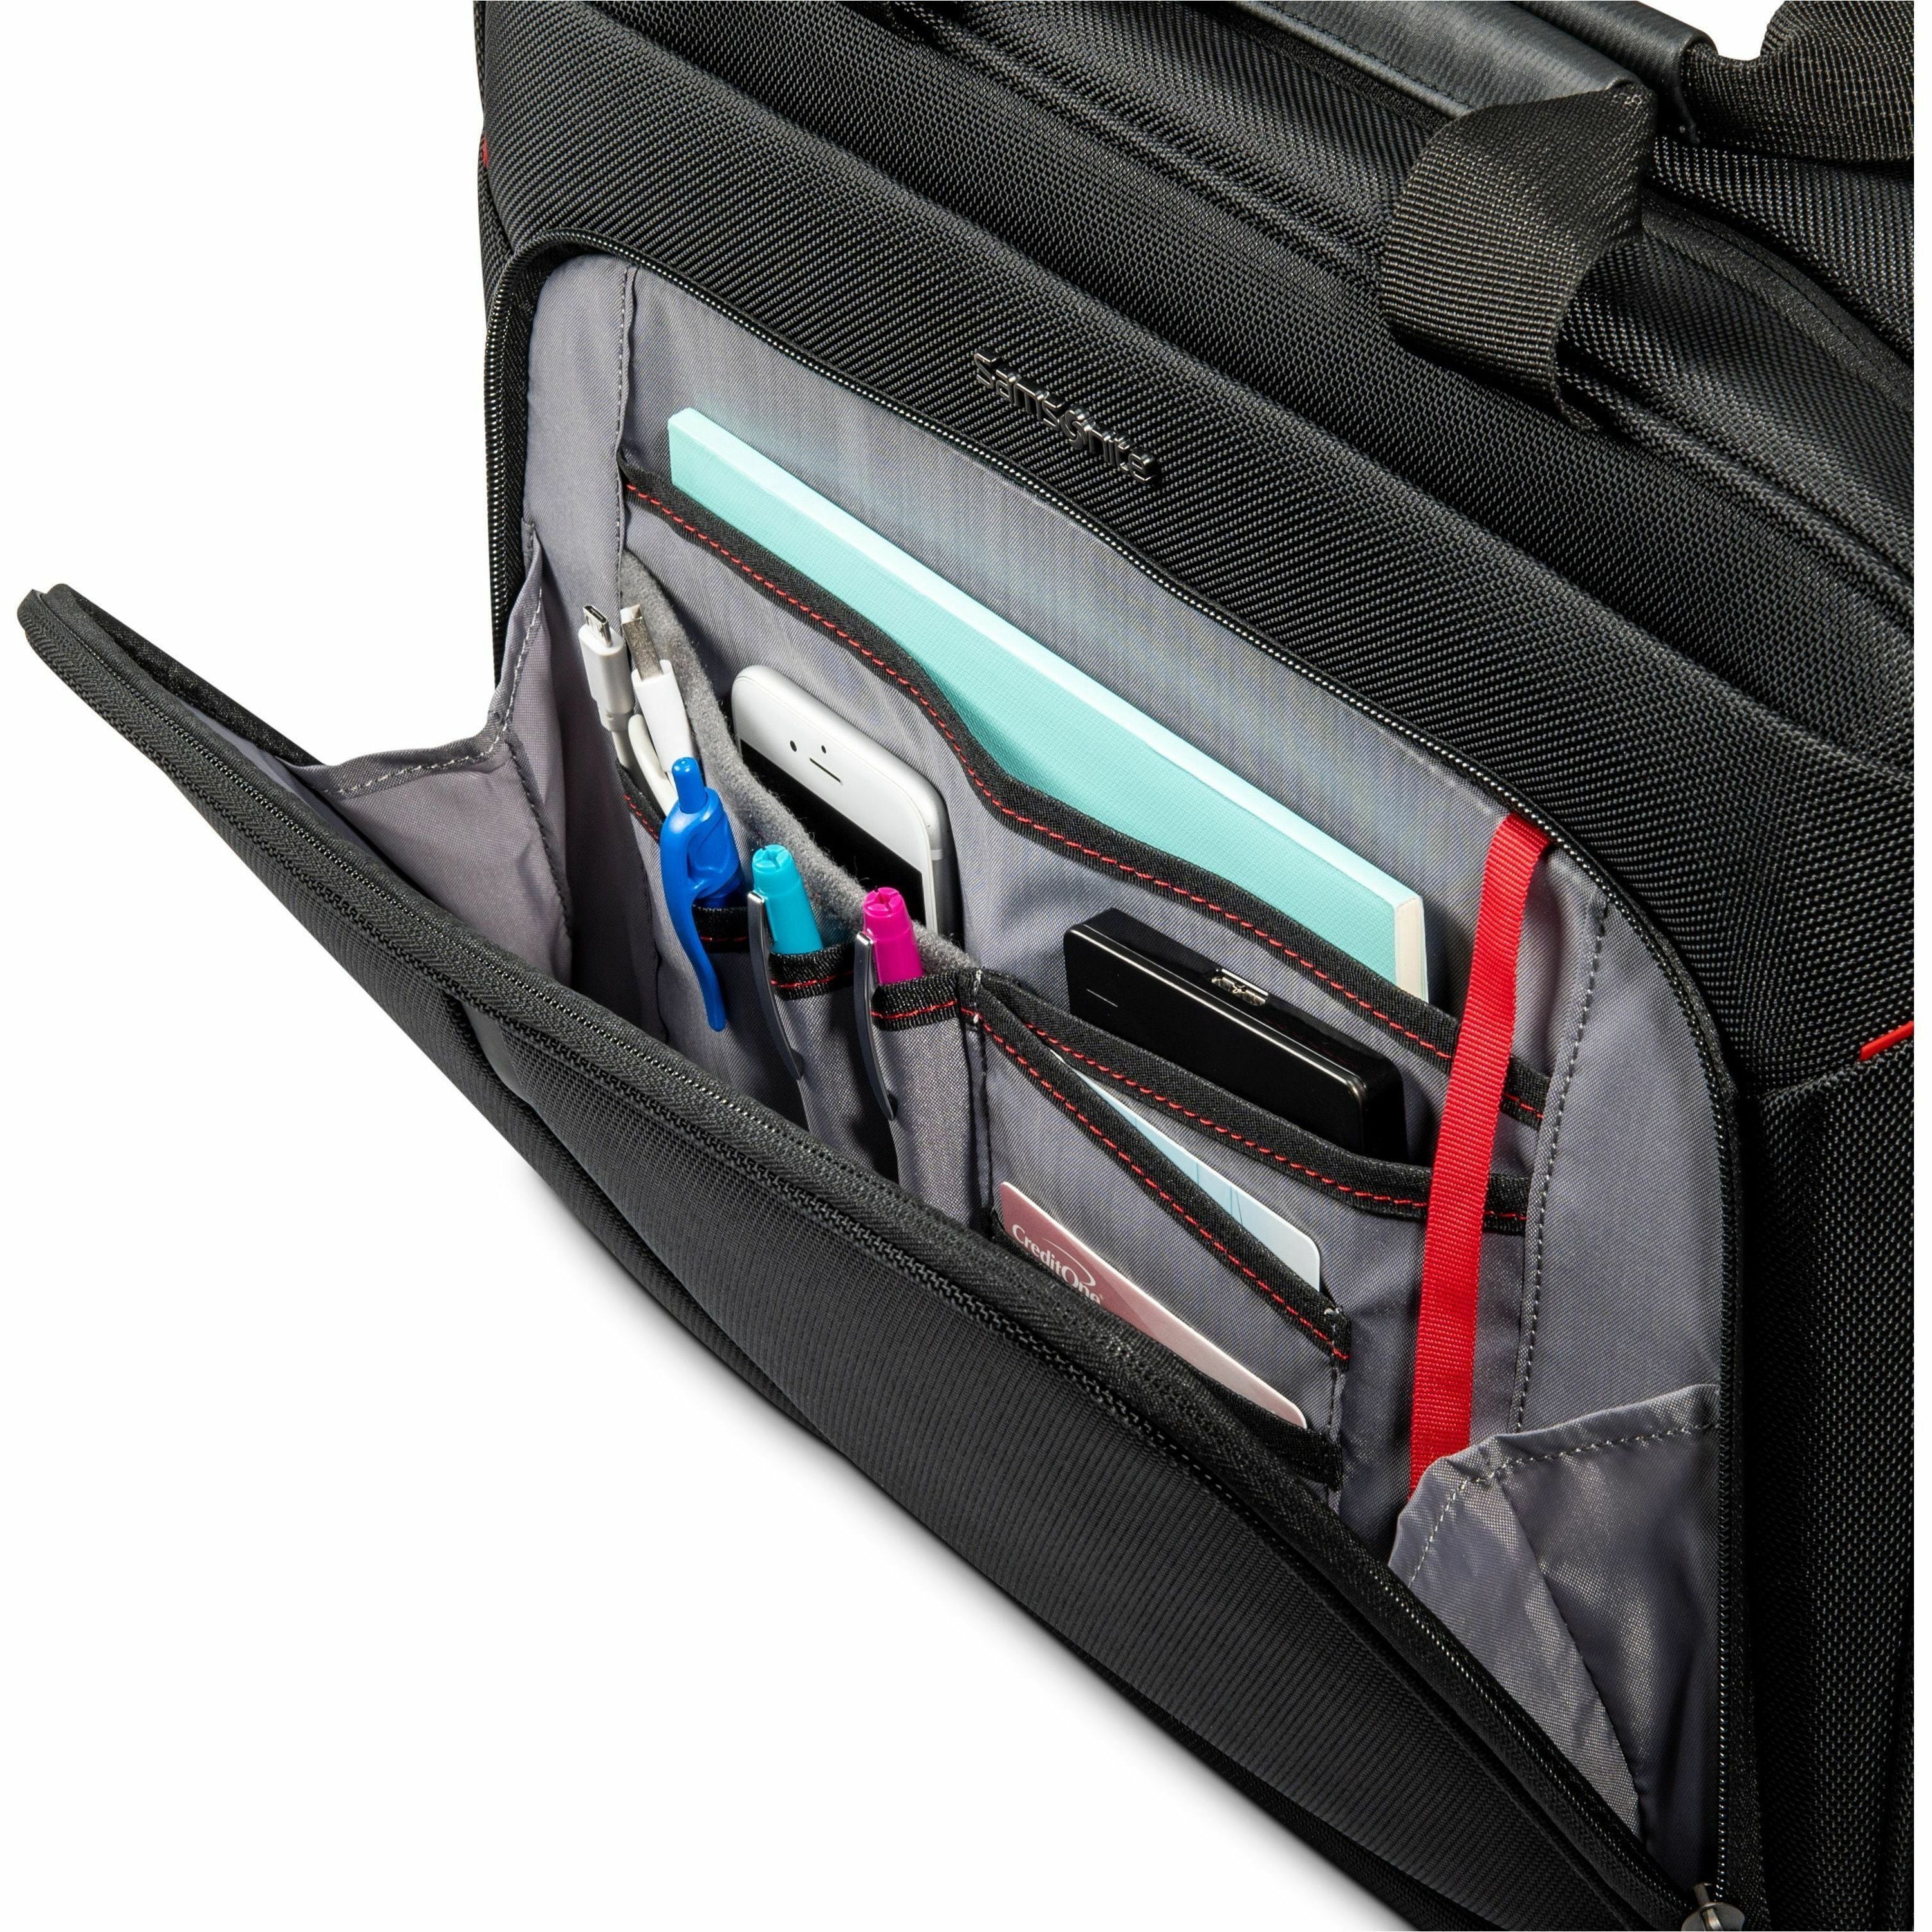 samsonite-xenon-40-carrying-case-briefcase-for-129-to-156-notebook-tablet-travel-electronics-black-1680d-ballistic-polyester-tricot-body-trolley-strap-55-height-x-125-width-x-17-depth-1-each_sml1473271041 - 3